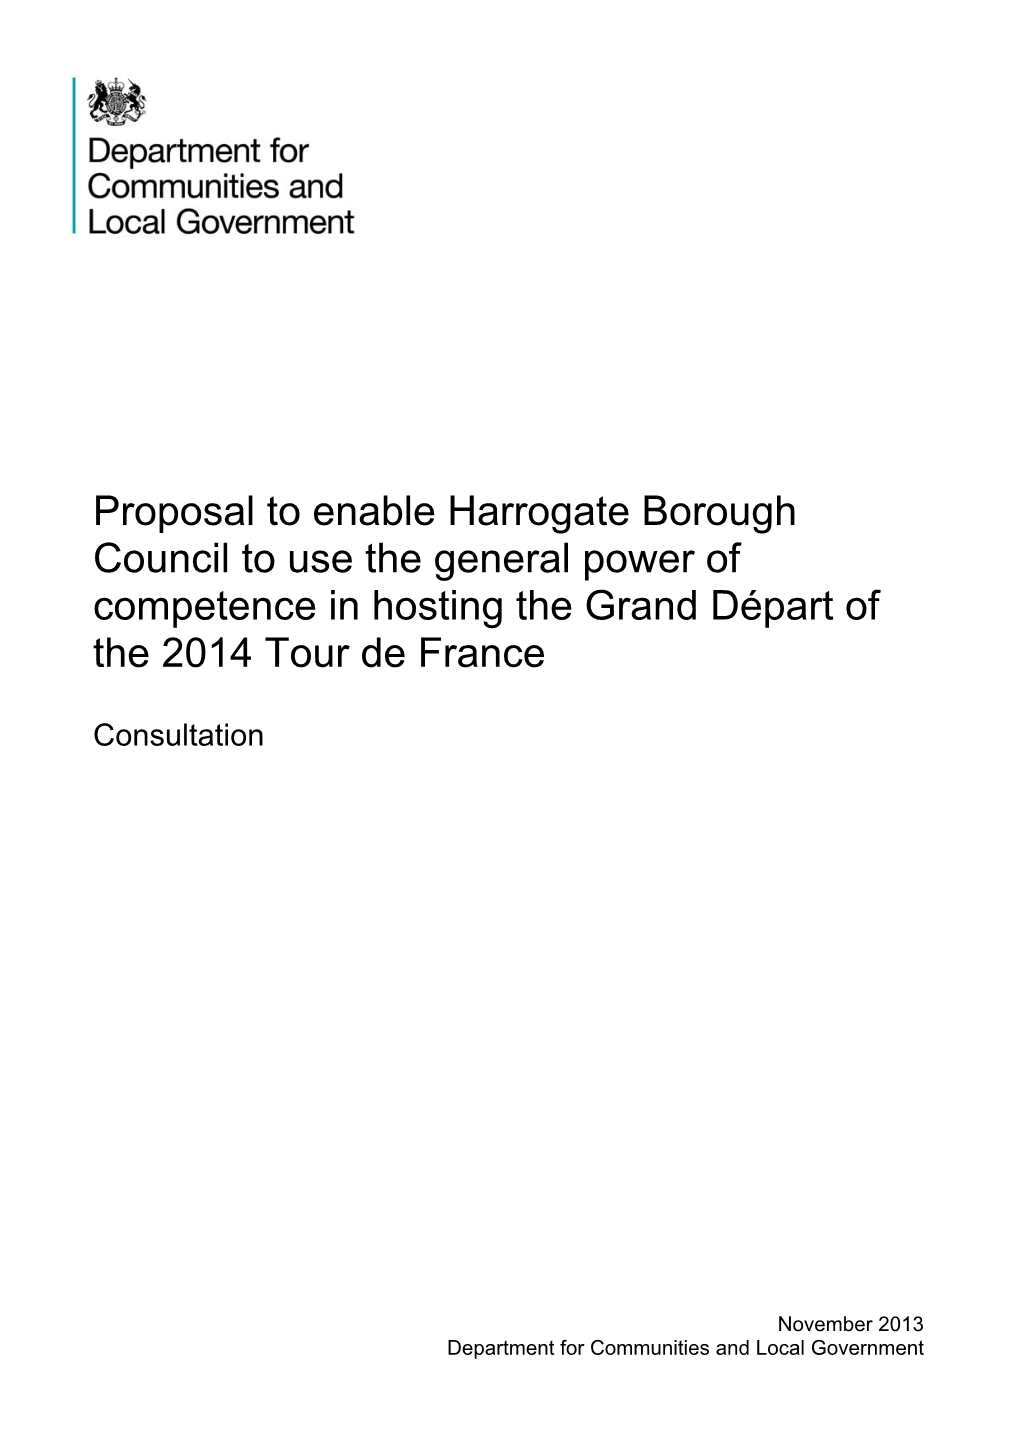 Proposal to Enable Harrogate Borough Council to Use the General Power of Competence in Hosting the Grand Départ of the 2014 Tour De France